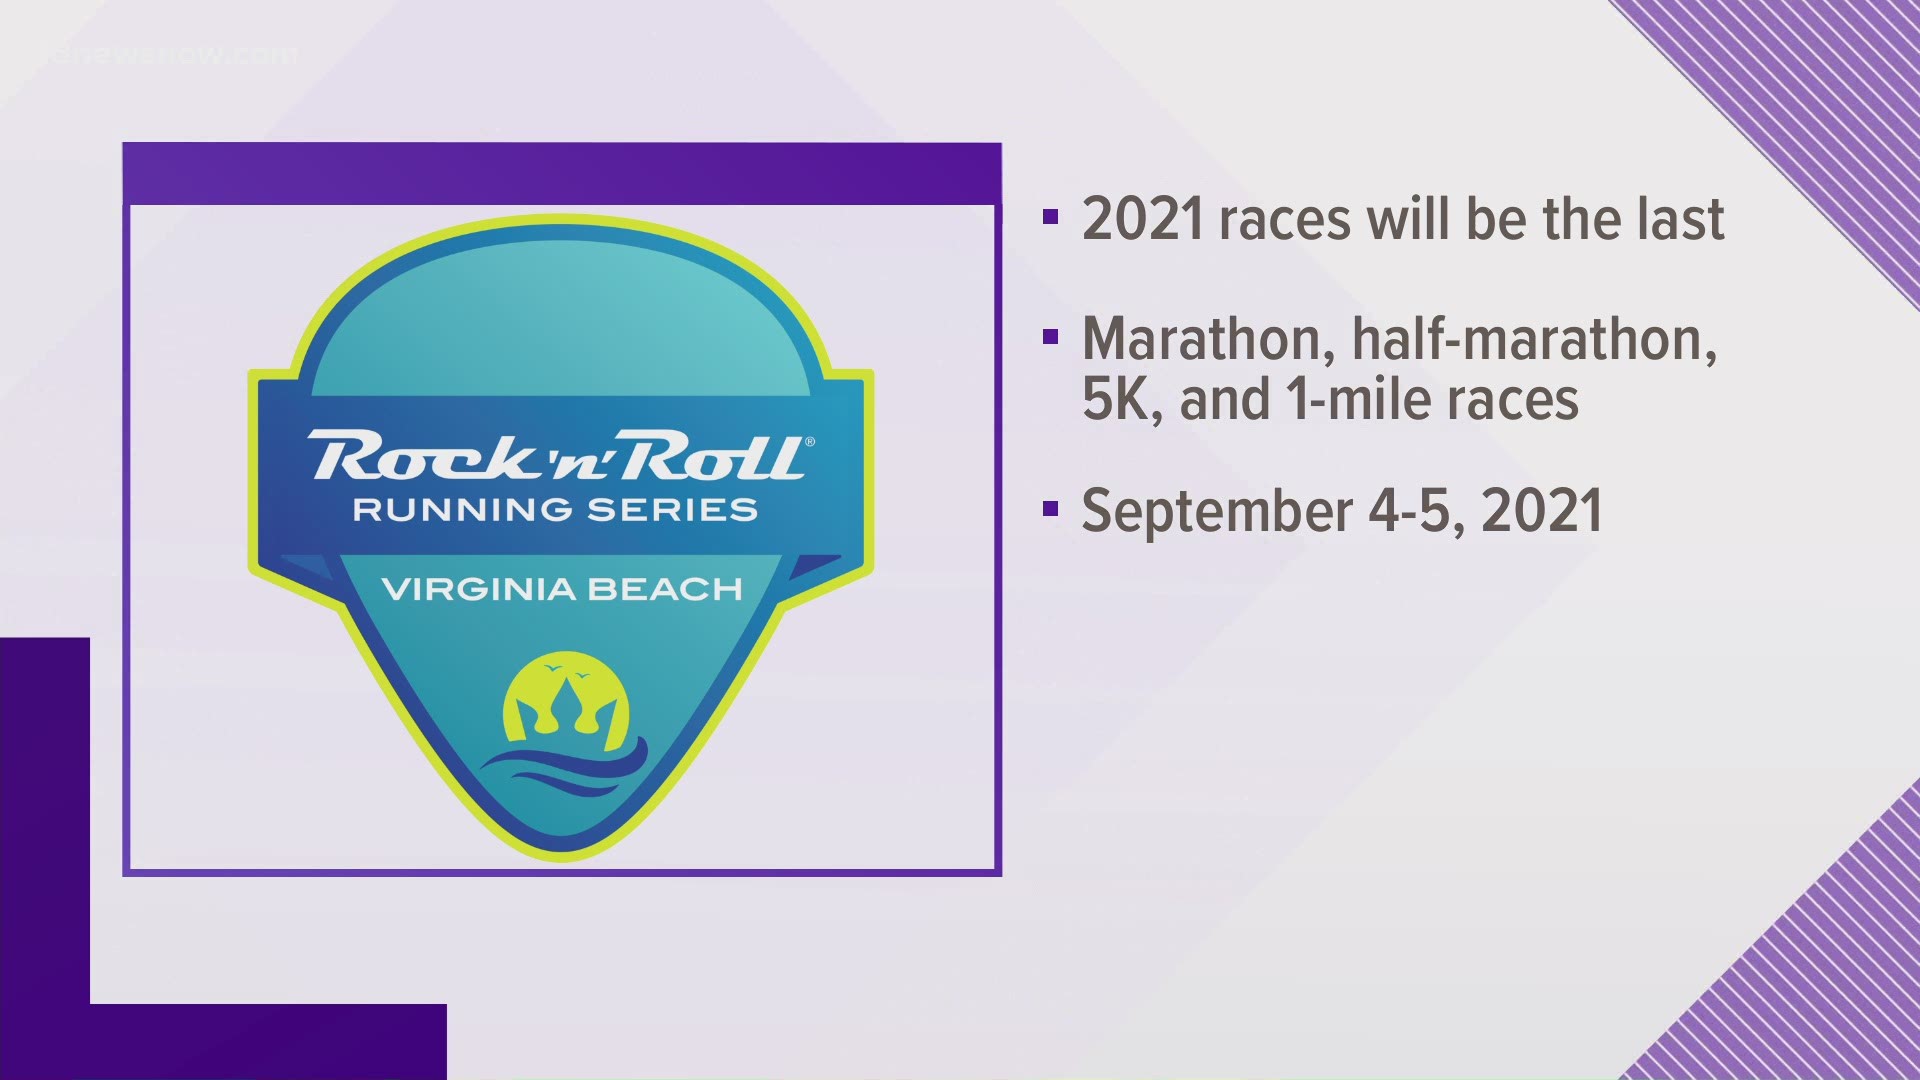 The Rock 'n' Roll races on September 4-5, 2021 will be the last of a 20-year tradition in Virginia Beach.